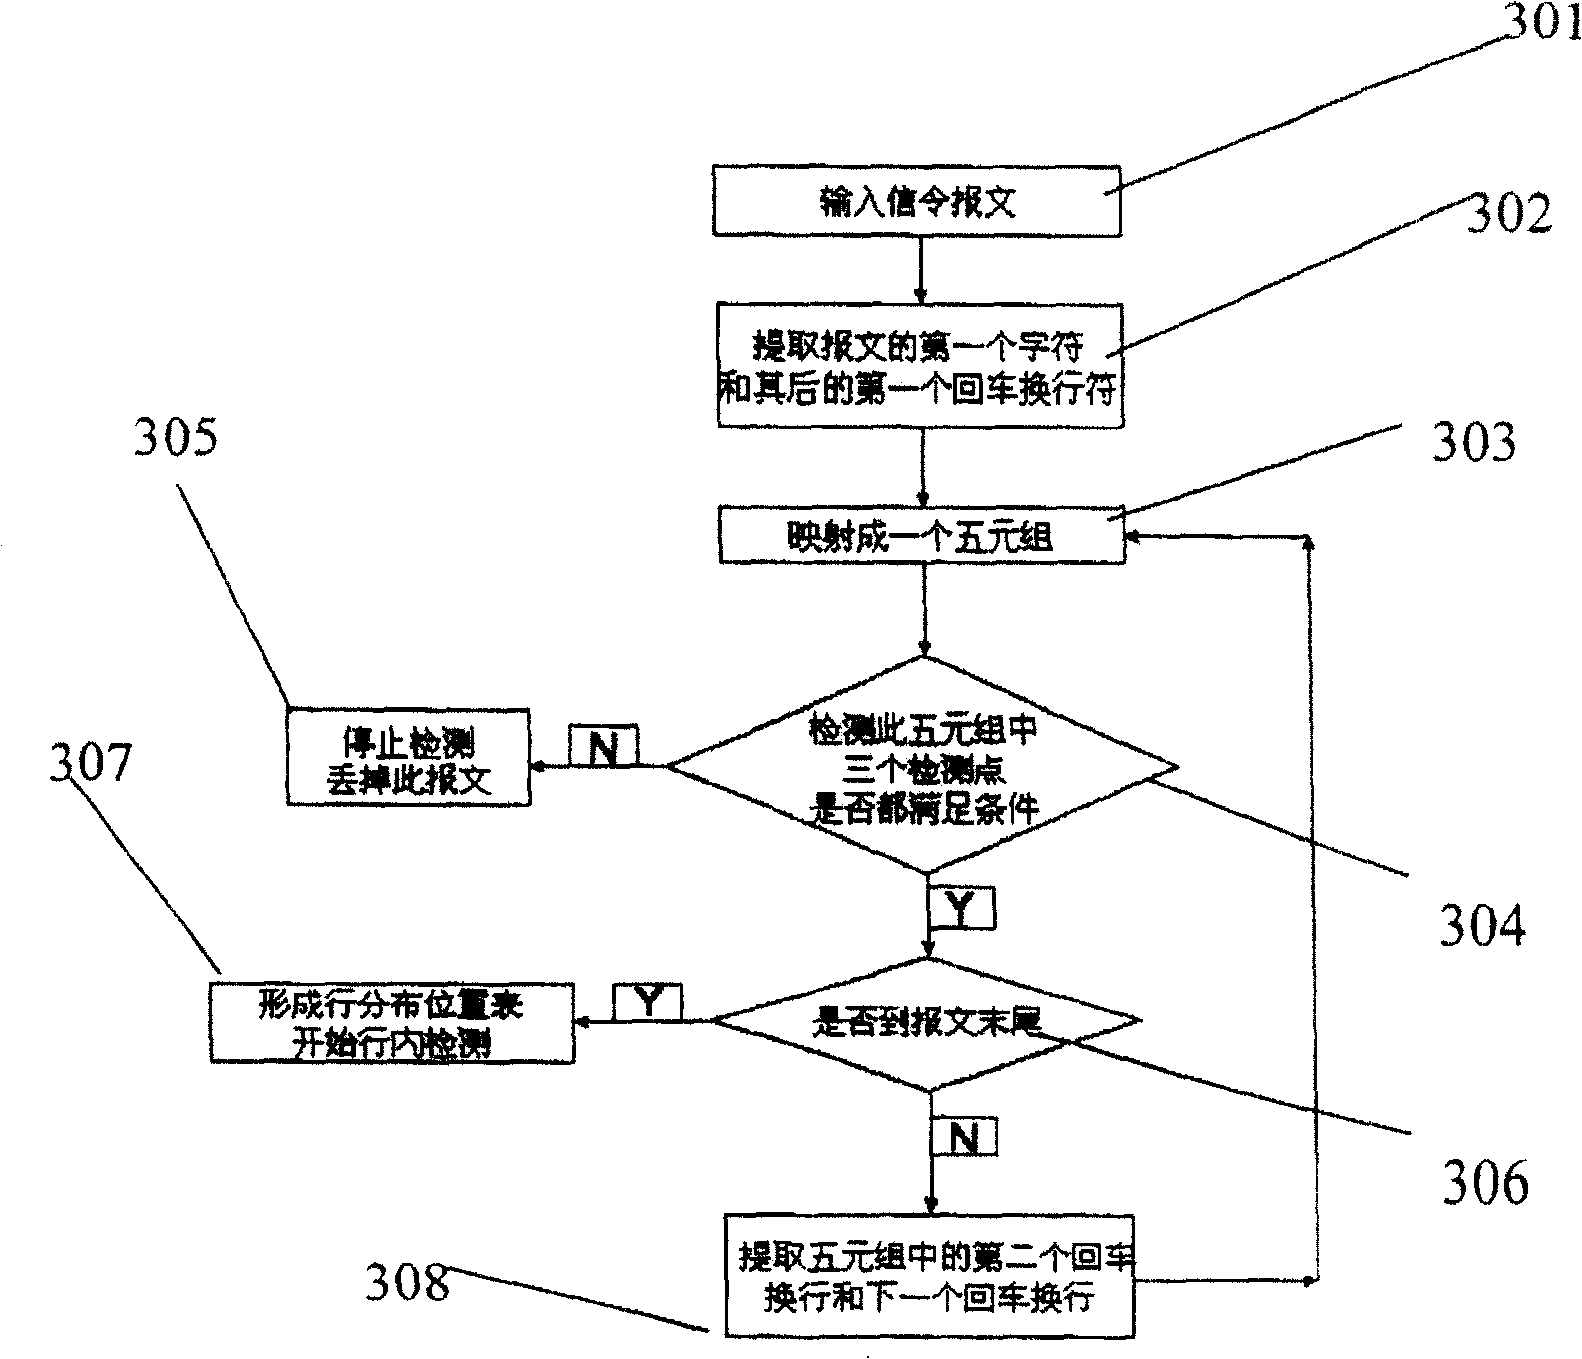 Method for detecting superlong signaling message based text code